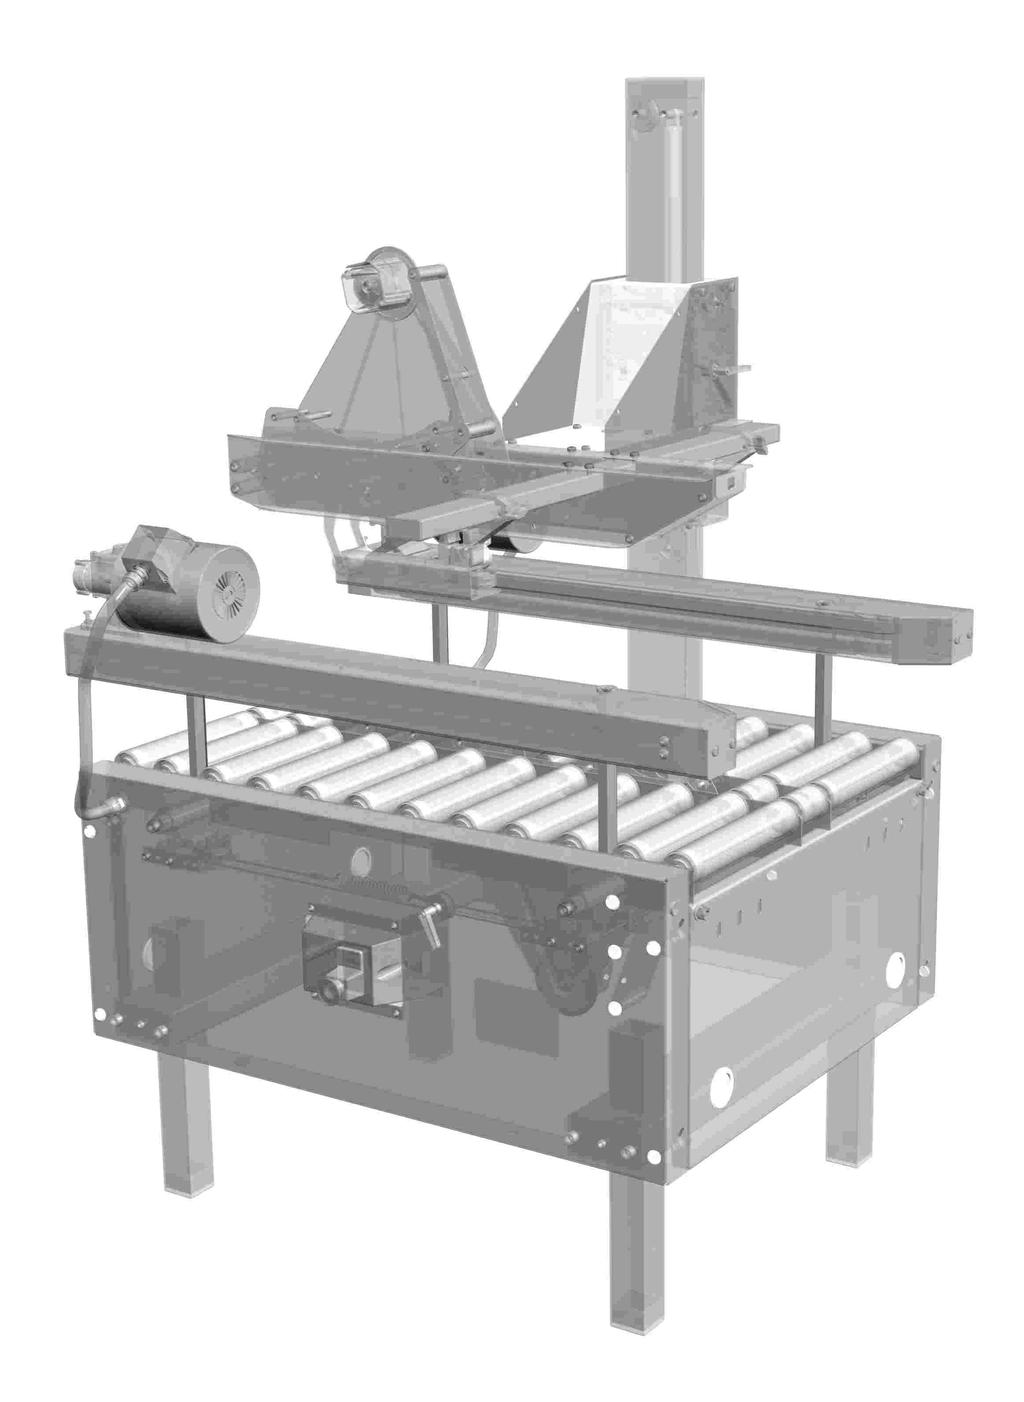 Accessories Raised side-drives The side-drives can be raised 50/100/150/200 mm above the roller table.